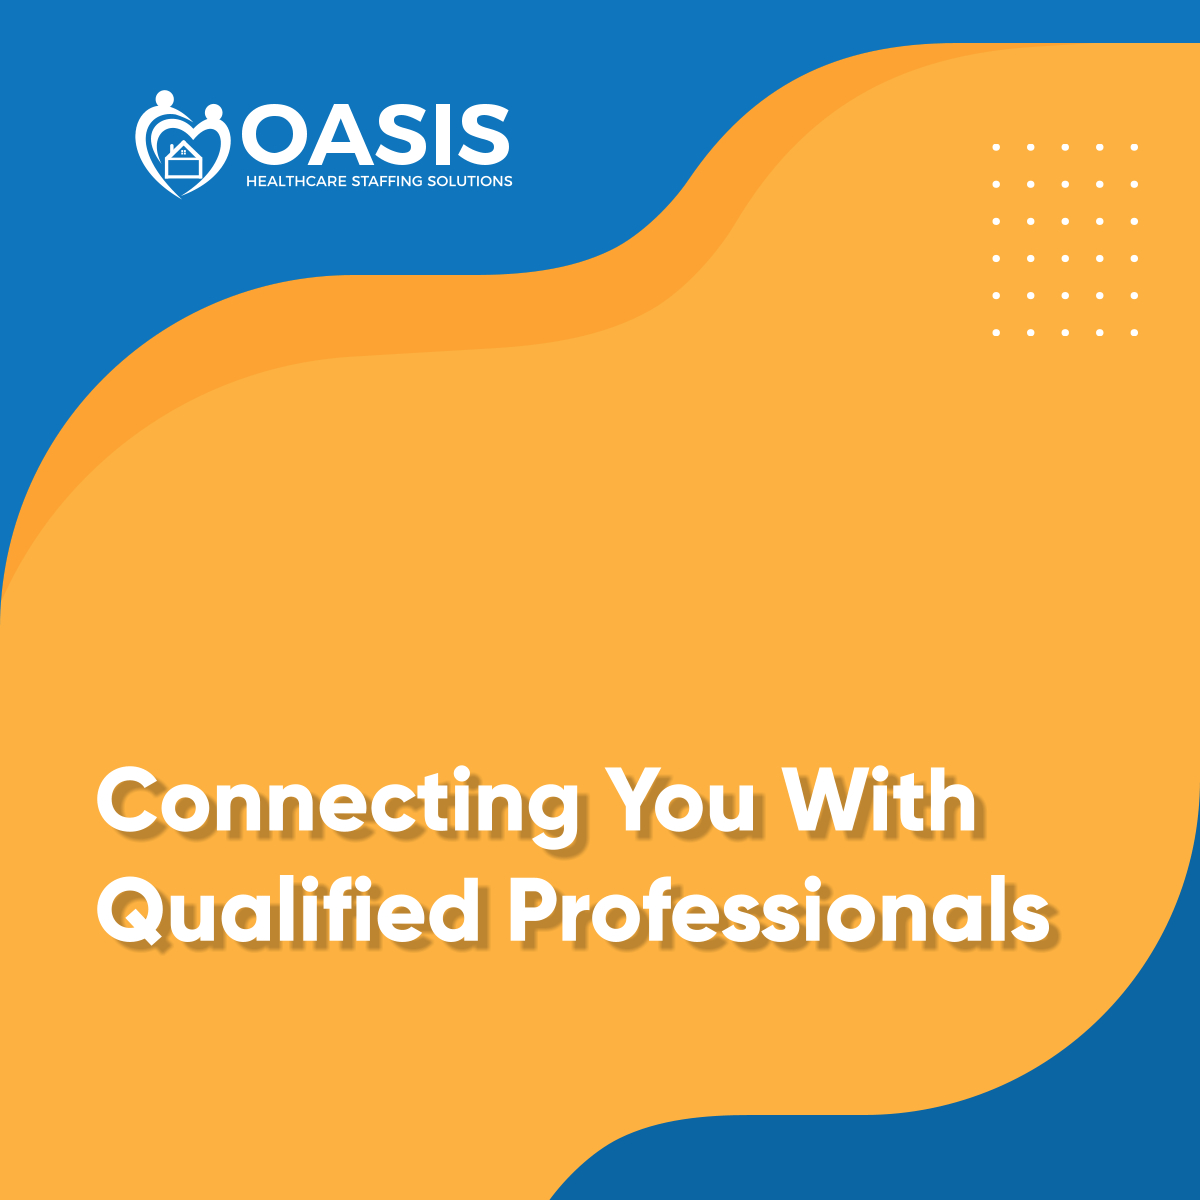 We can connect you with Certified Nursing Assistants, Licensed Practical Nurses, Registered Nurses, and many more. For inquiries, call us at 877-361-2835.

#QualifiedProfessionals #HealthcareStaffing #OasisHealthcareStaffingSolutions #PointPleasantNJ #CallUs